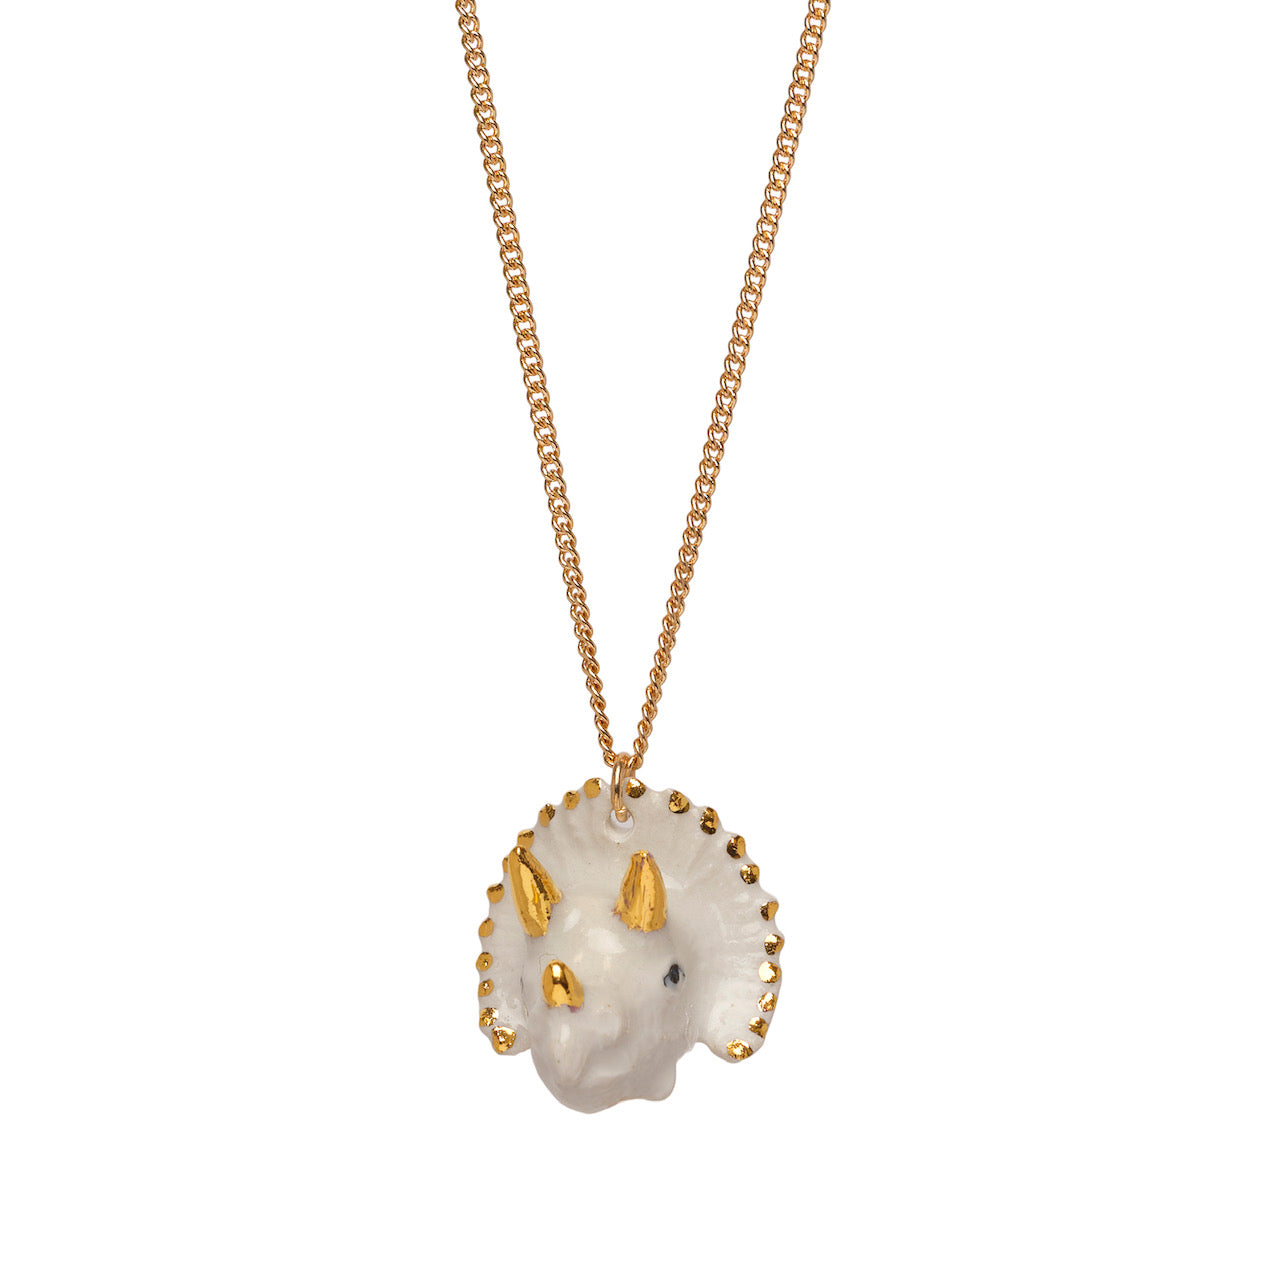 Large White and Gold Triceratops Necklace